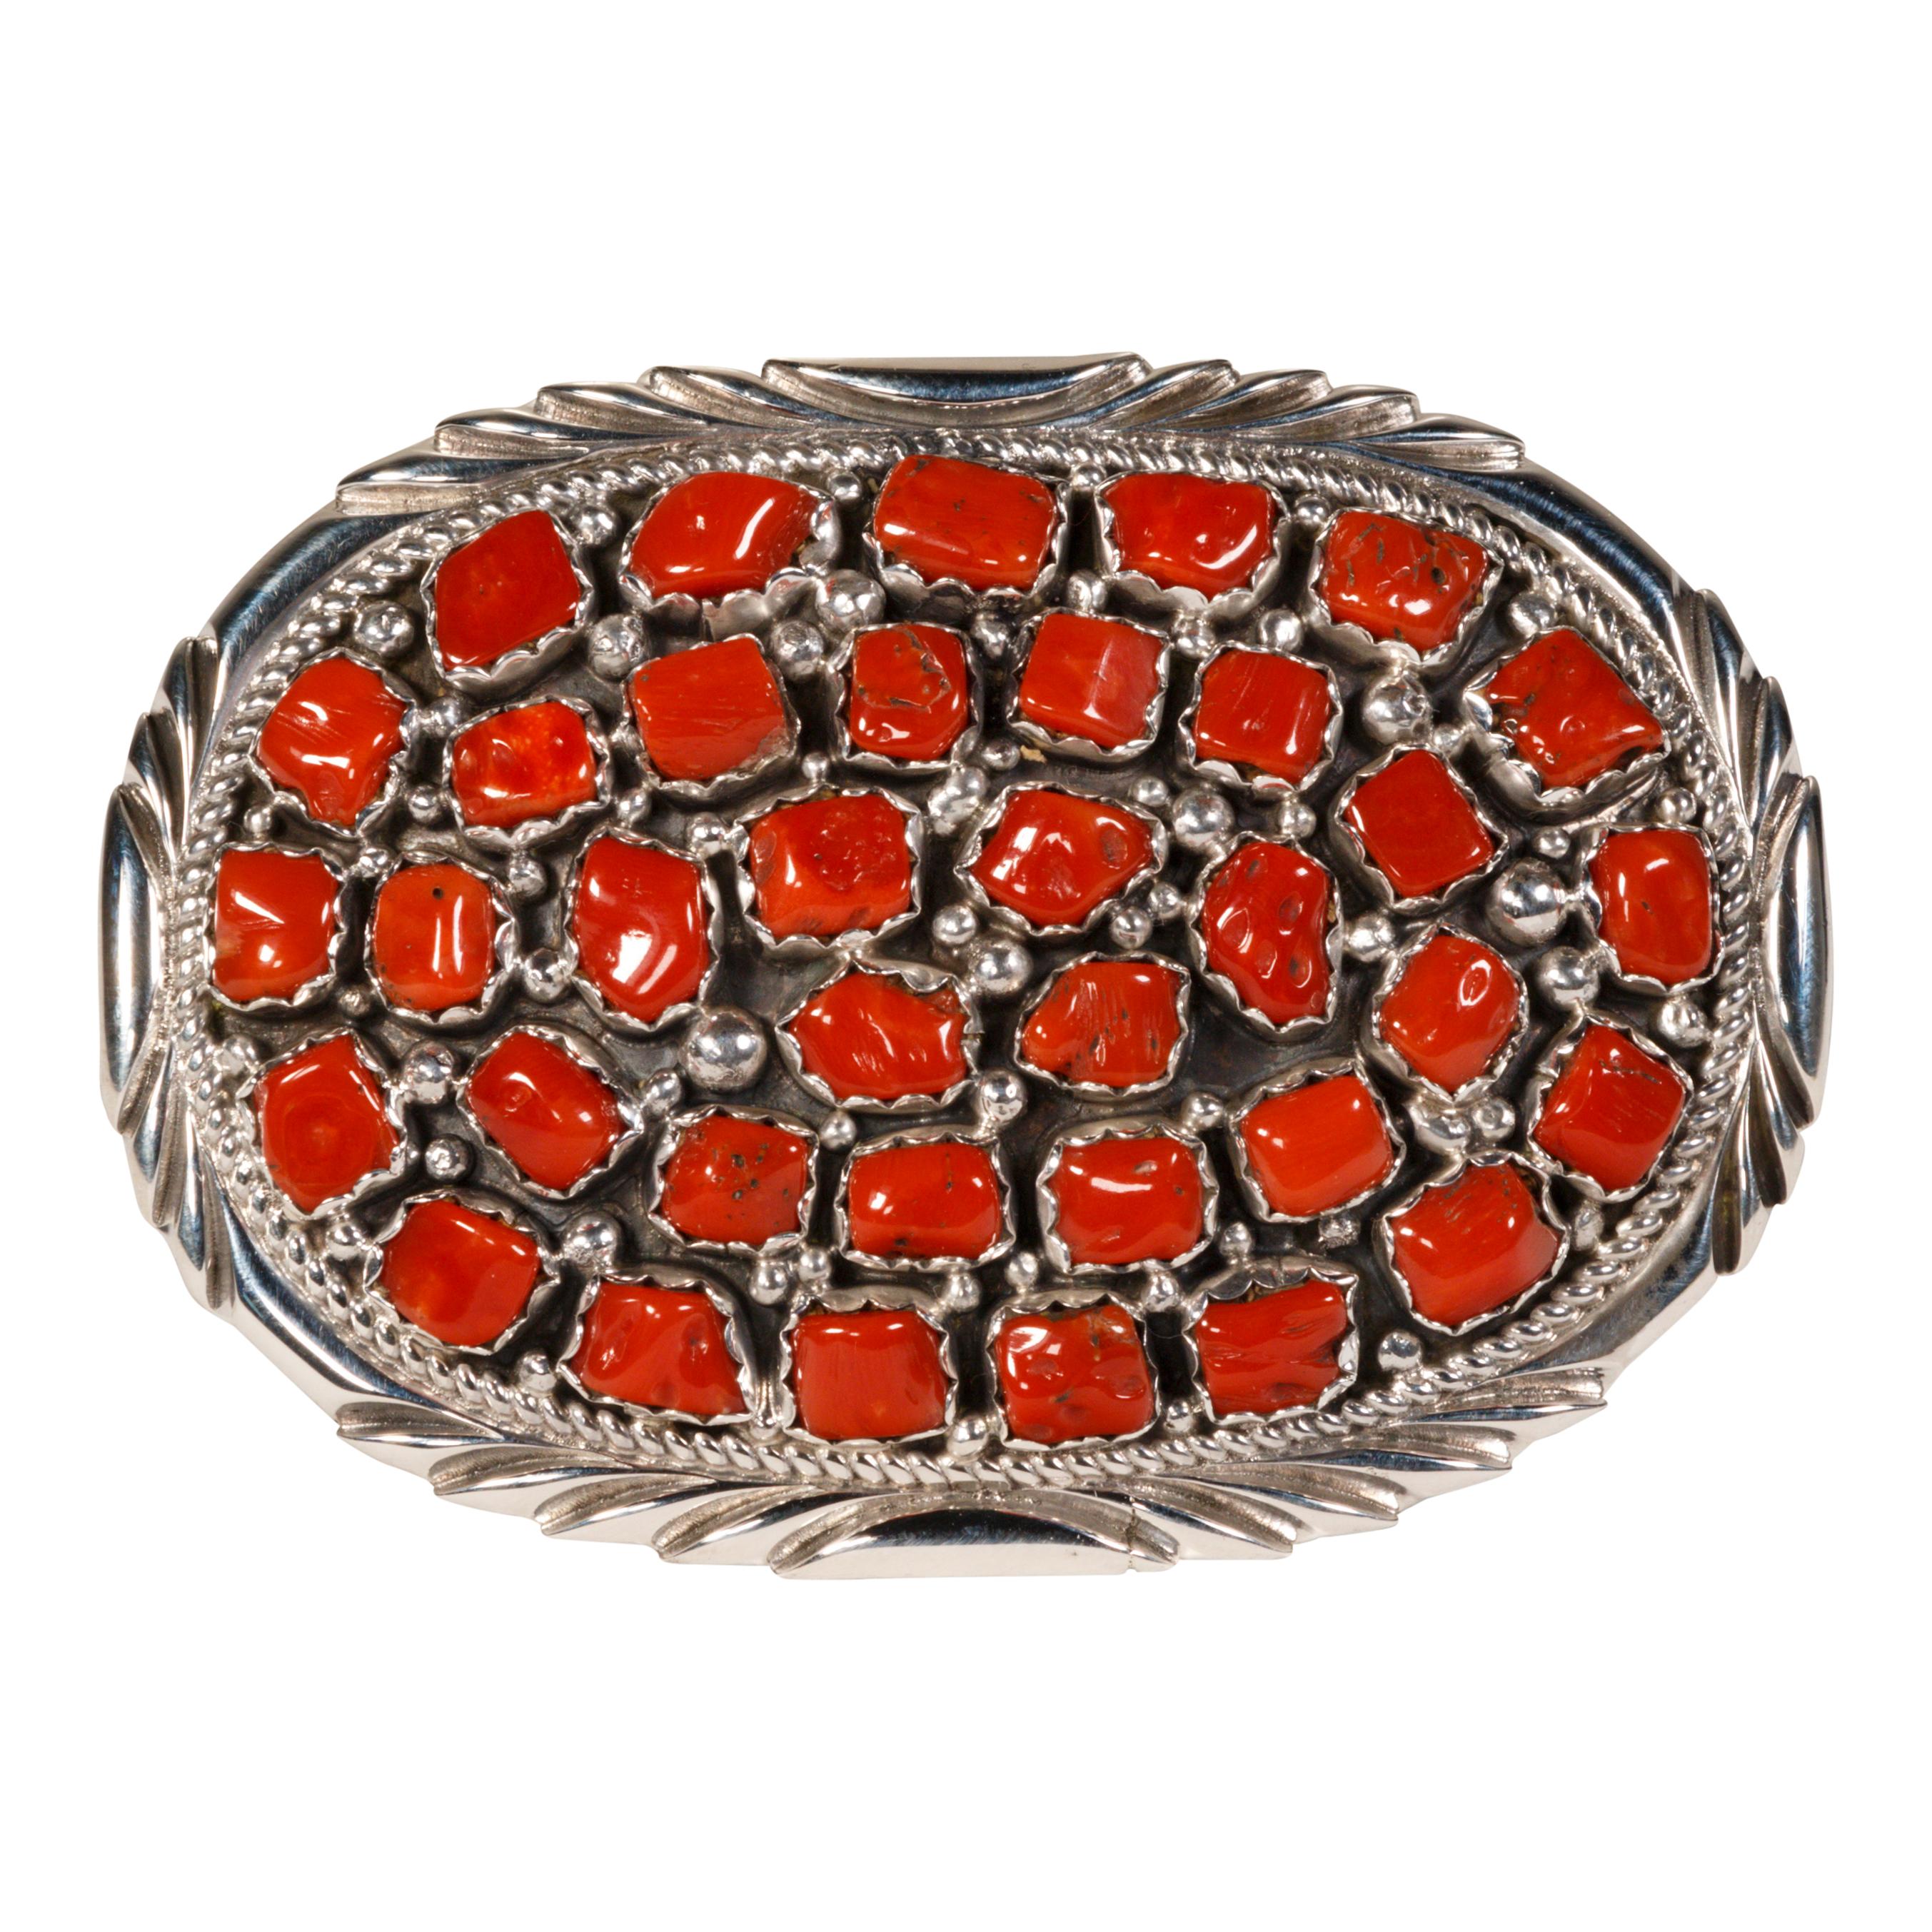 Shadowbox belt buckle with multi coral nuggets. Marked sterling silver. Made by Navajo silversmith J. Begay. Stunning oxblood coral stones surrounded by twisted rope border and sterling beads. 

PERIOD: Last Half 20th Century
ORIGIN: Southwest -